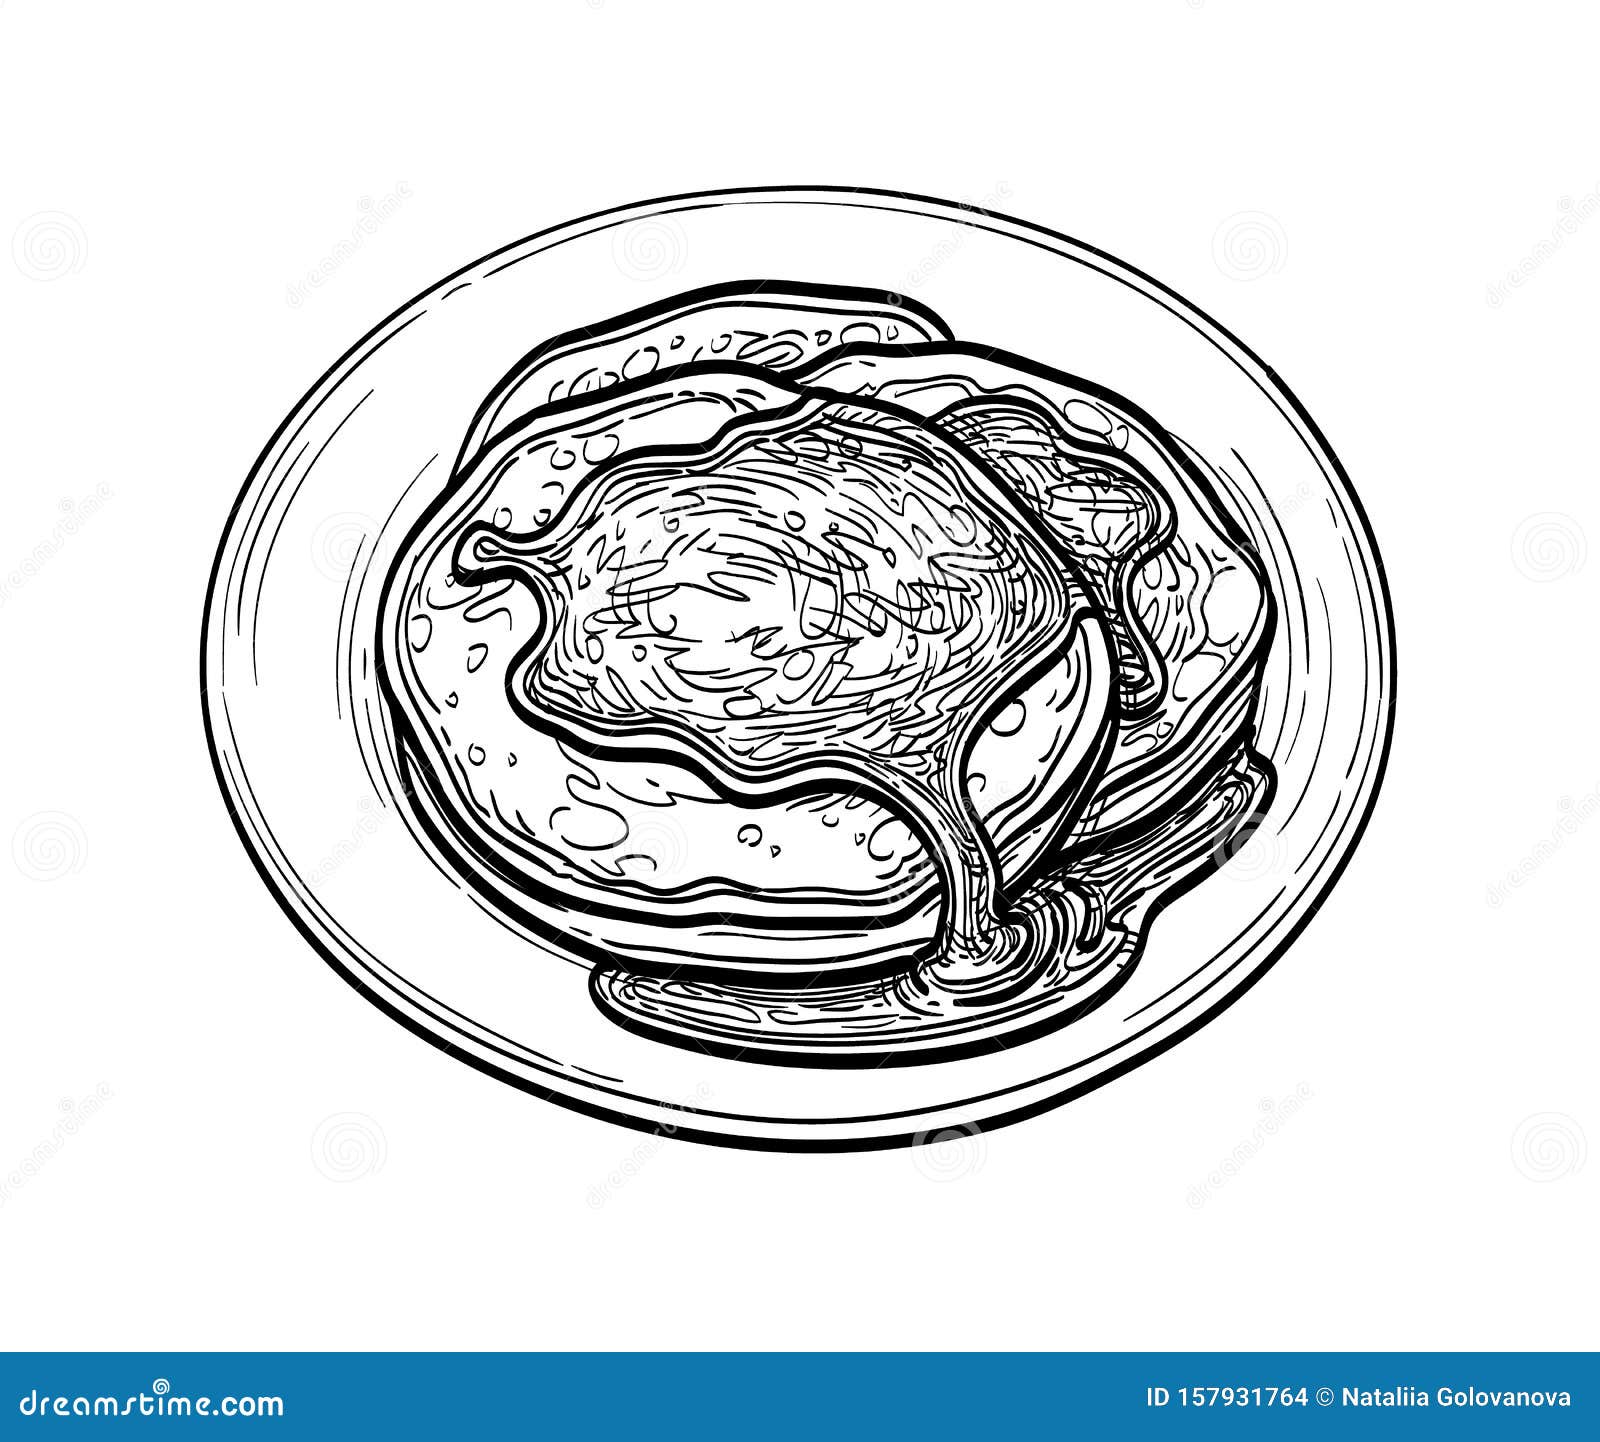 Premium Vector  Pancakes with maple syrup pancakes on the plate sketch  breakfastvintage hand drawn drawing style